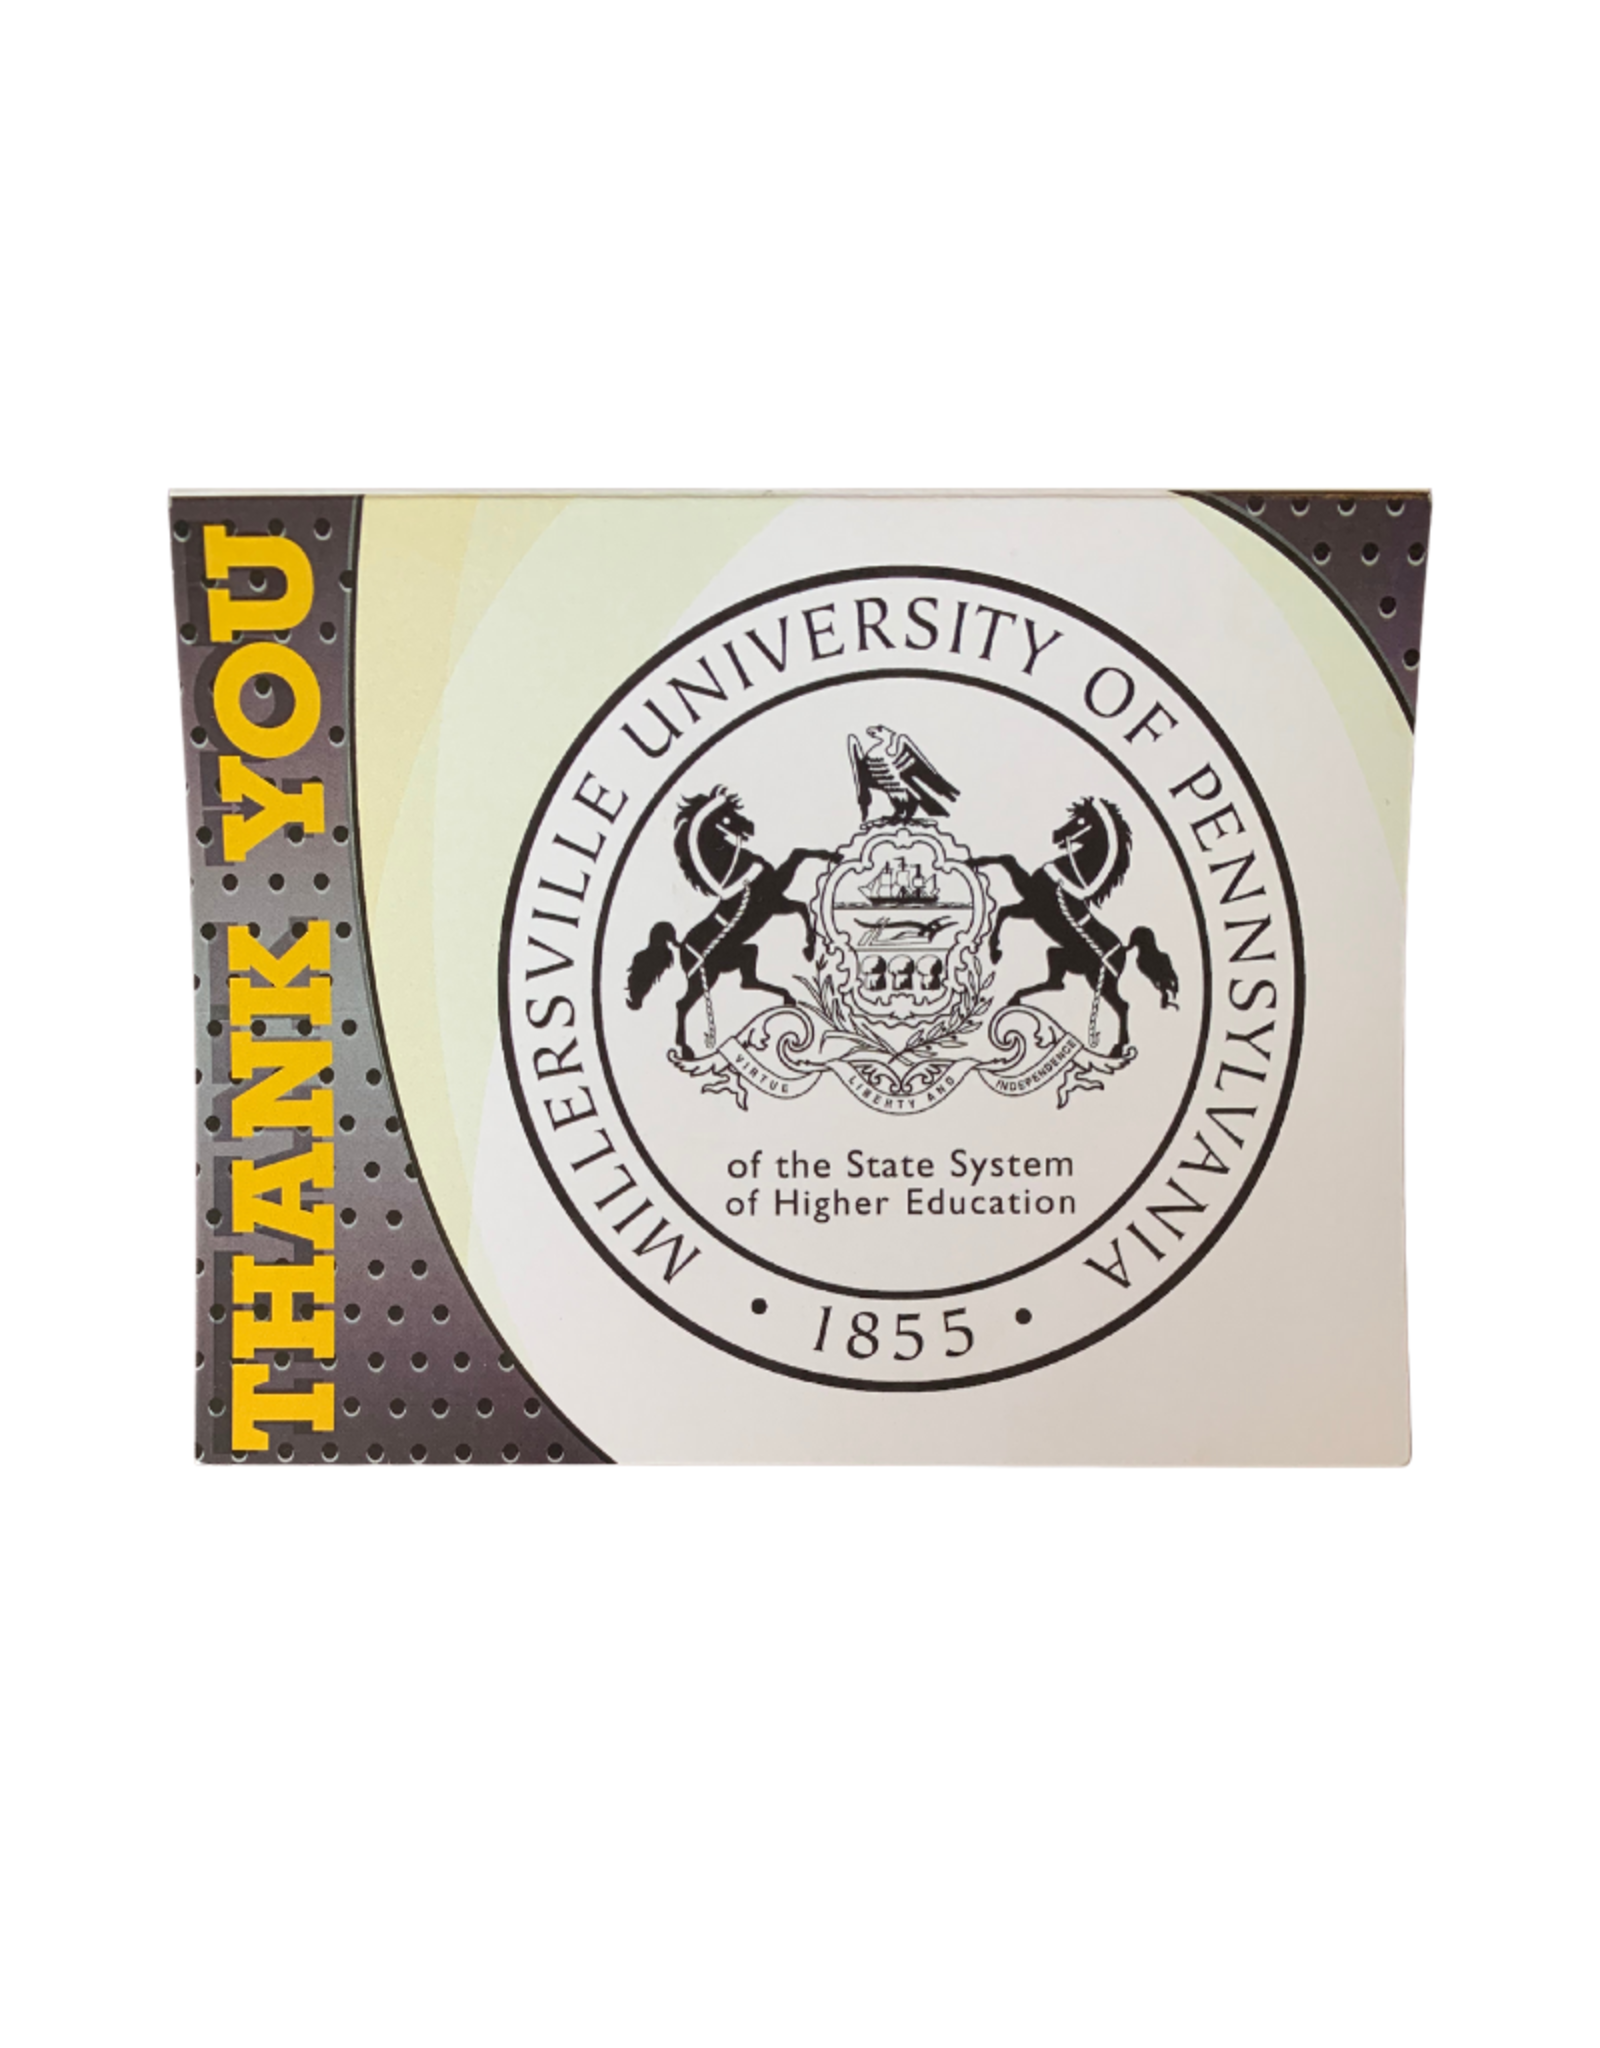 Millersville Seal Thank You Card